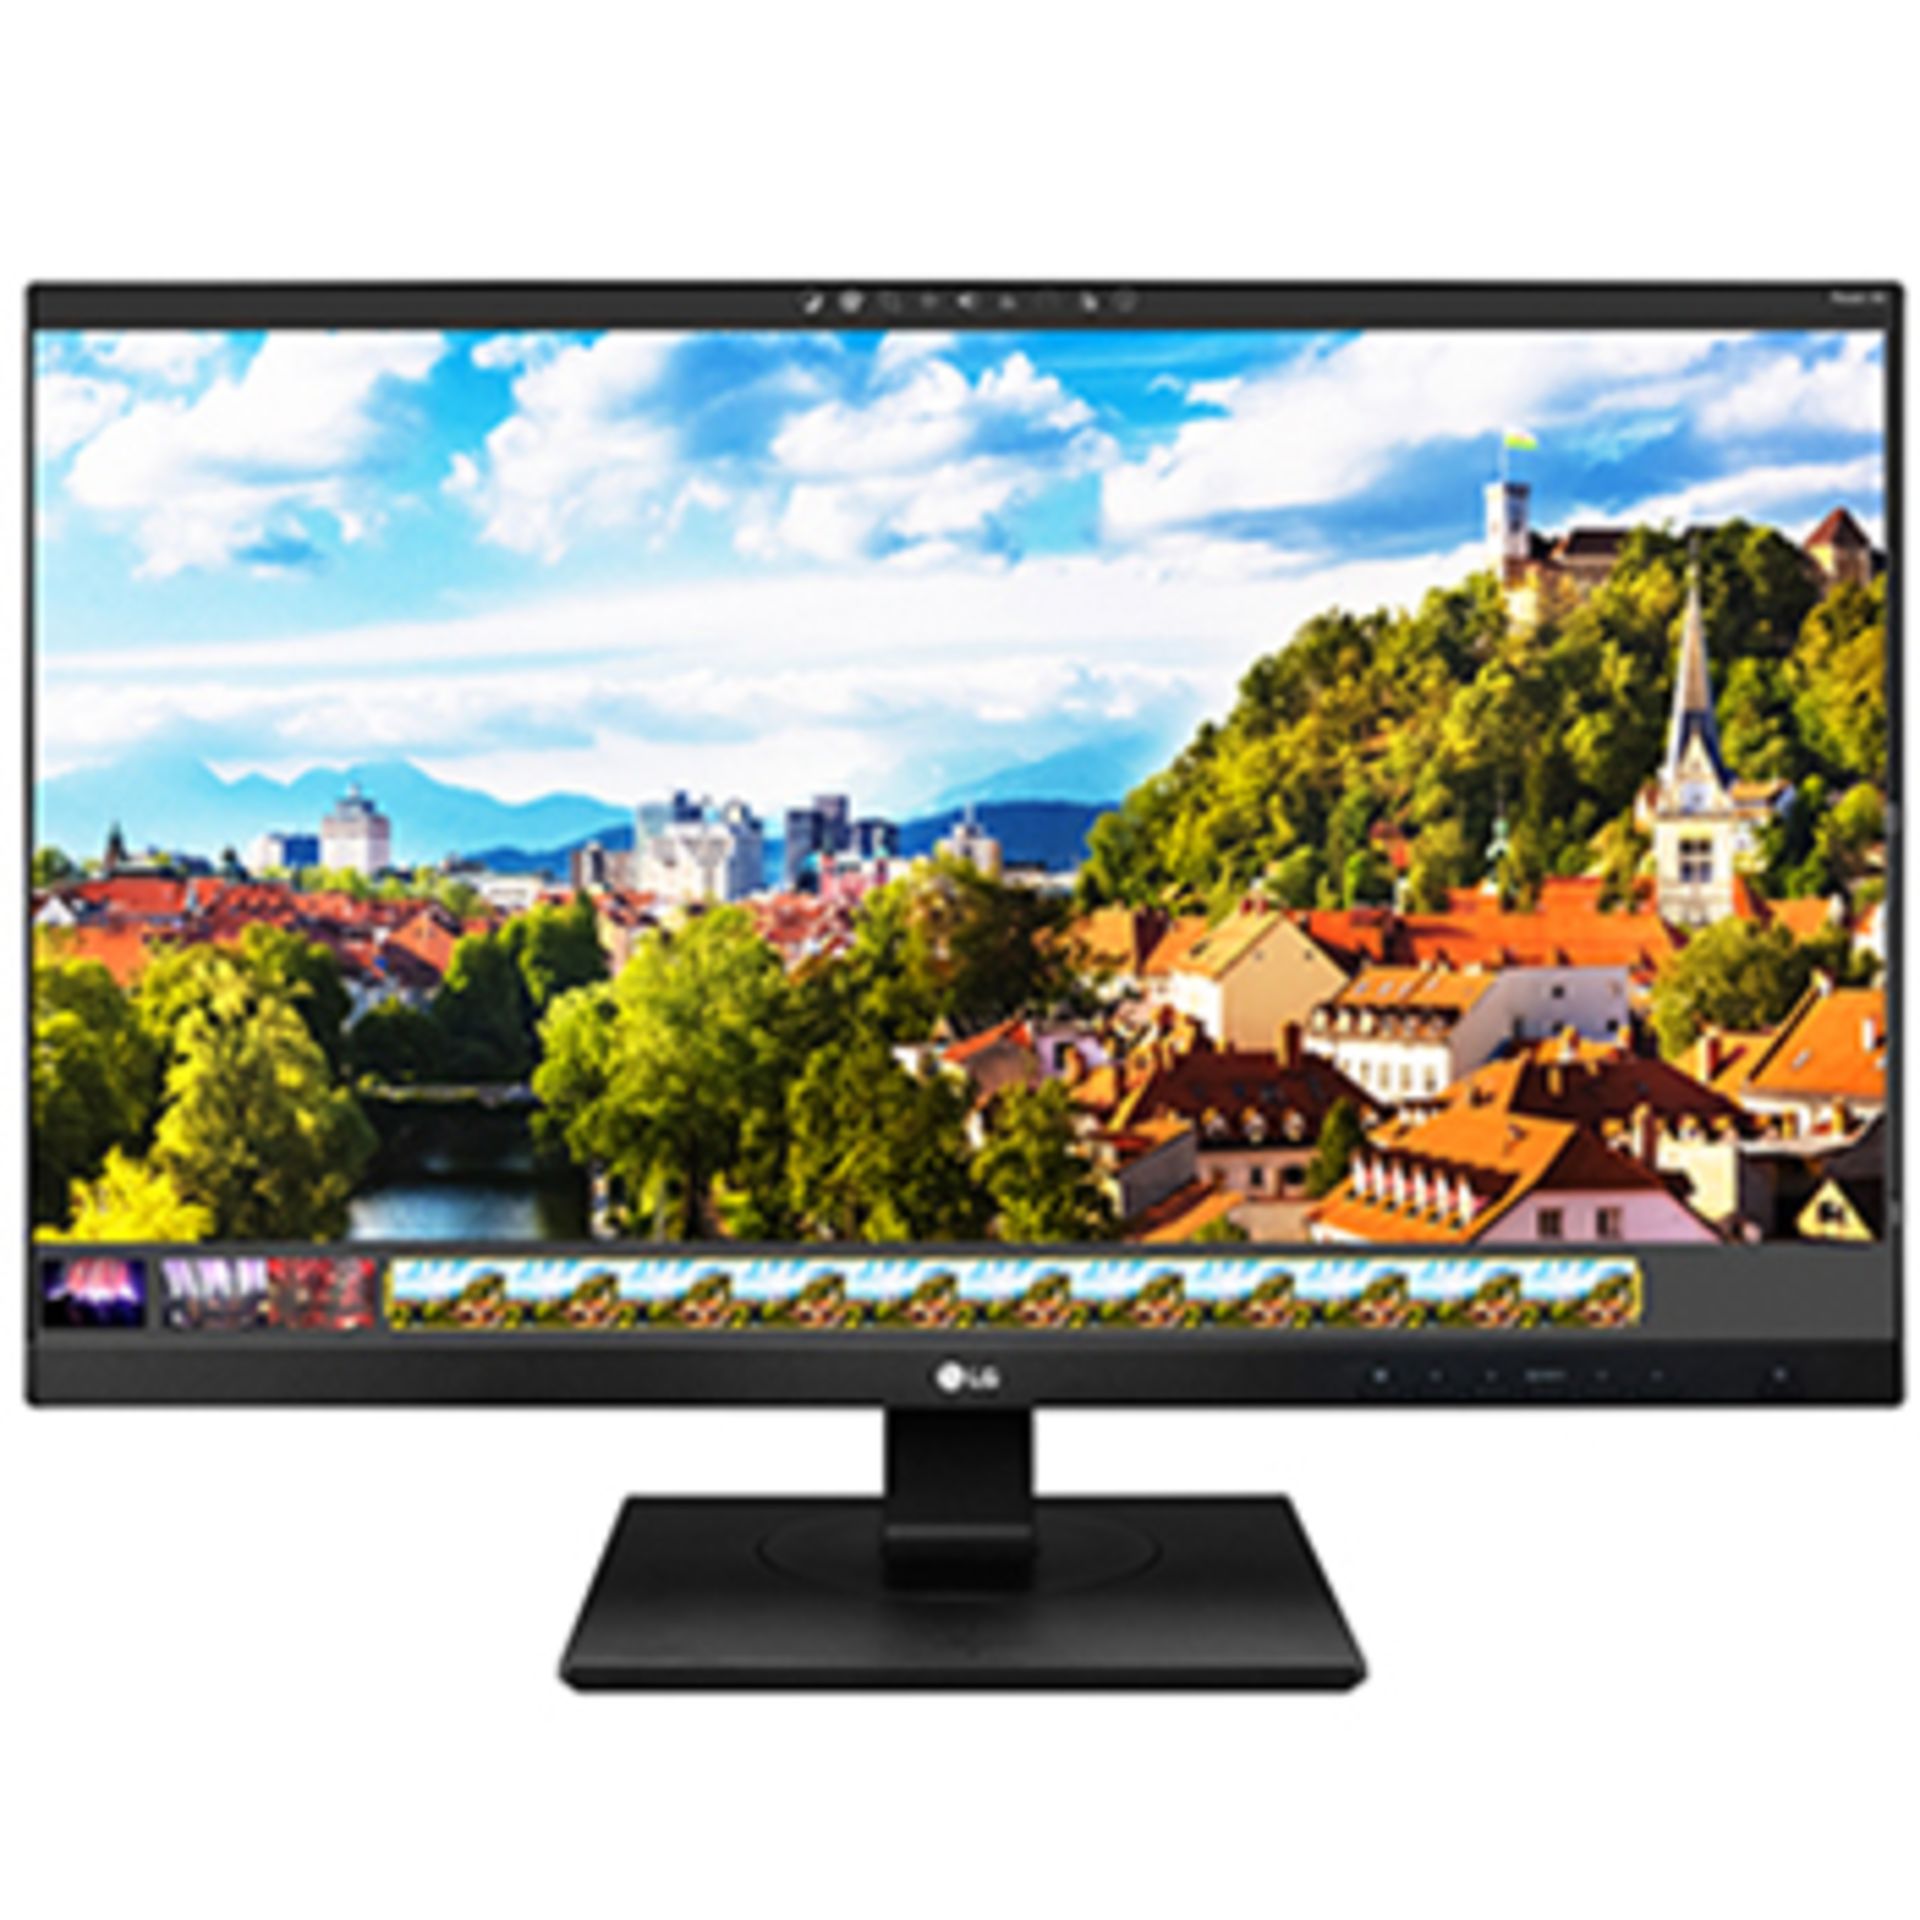 V Grade A LG 24 Inch FULL HD IPS LED MONITOR WITH SPEAKERS - DVI-D, HDMI, DISPLAY PORT X 2, USB 3. - Image 2 of 2